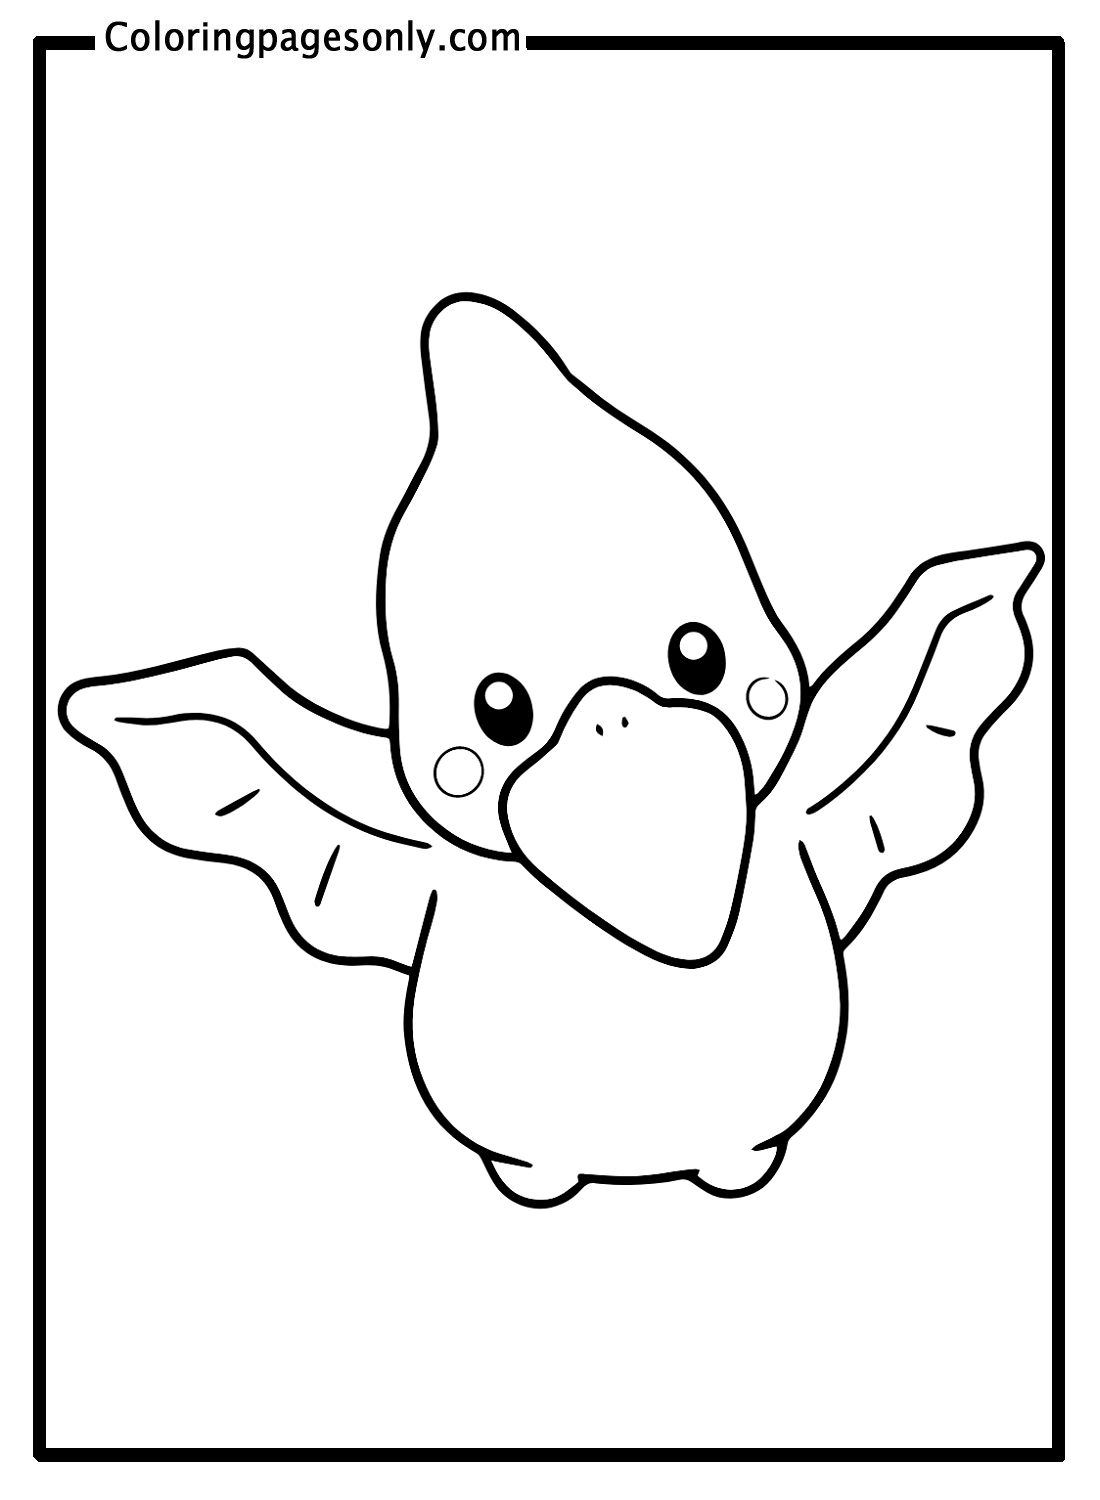 Dinosaur Cartoon Pictures Coloring Pages